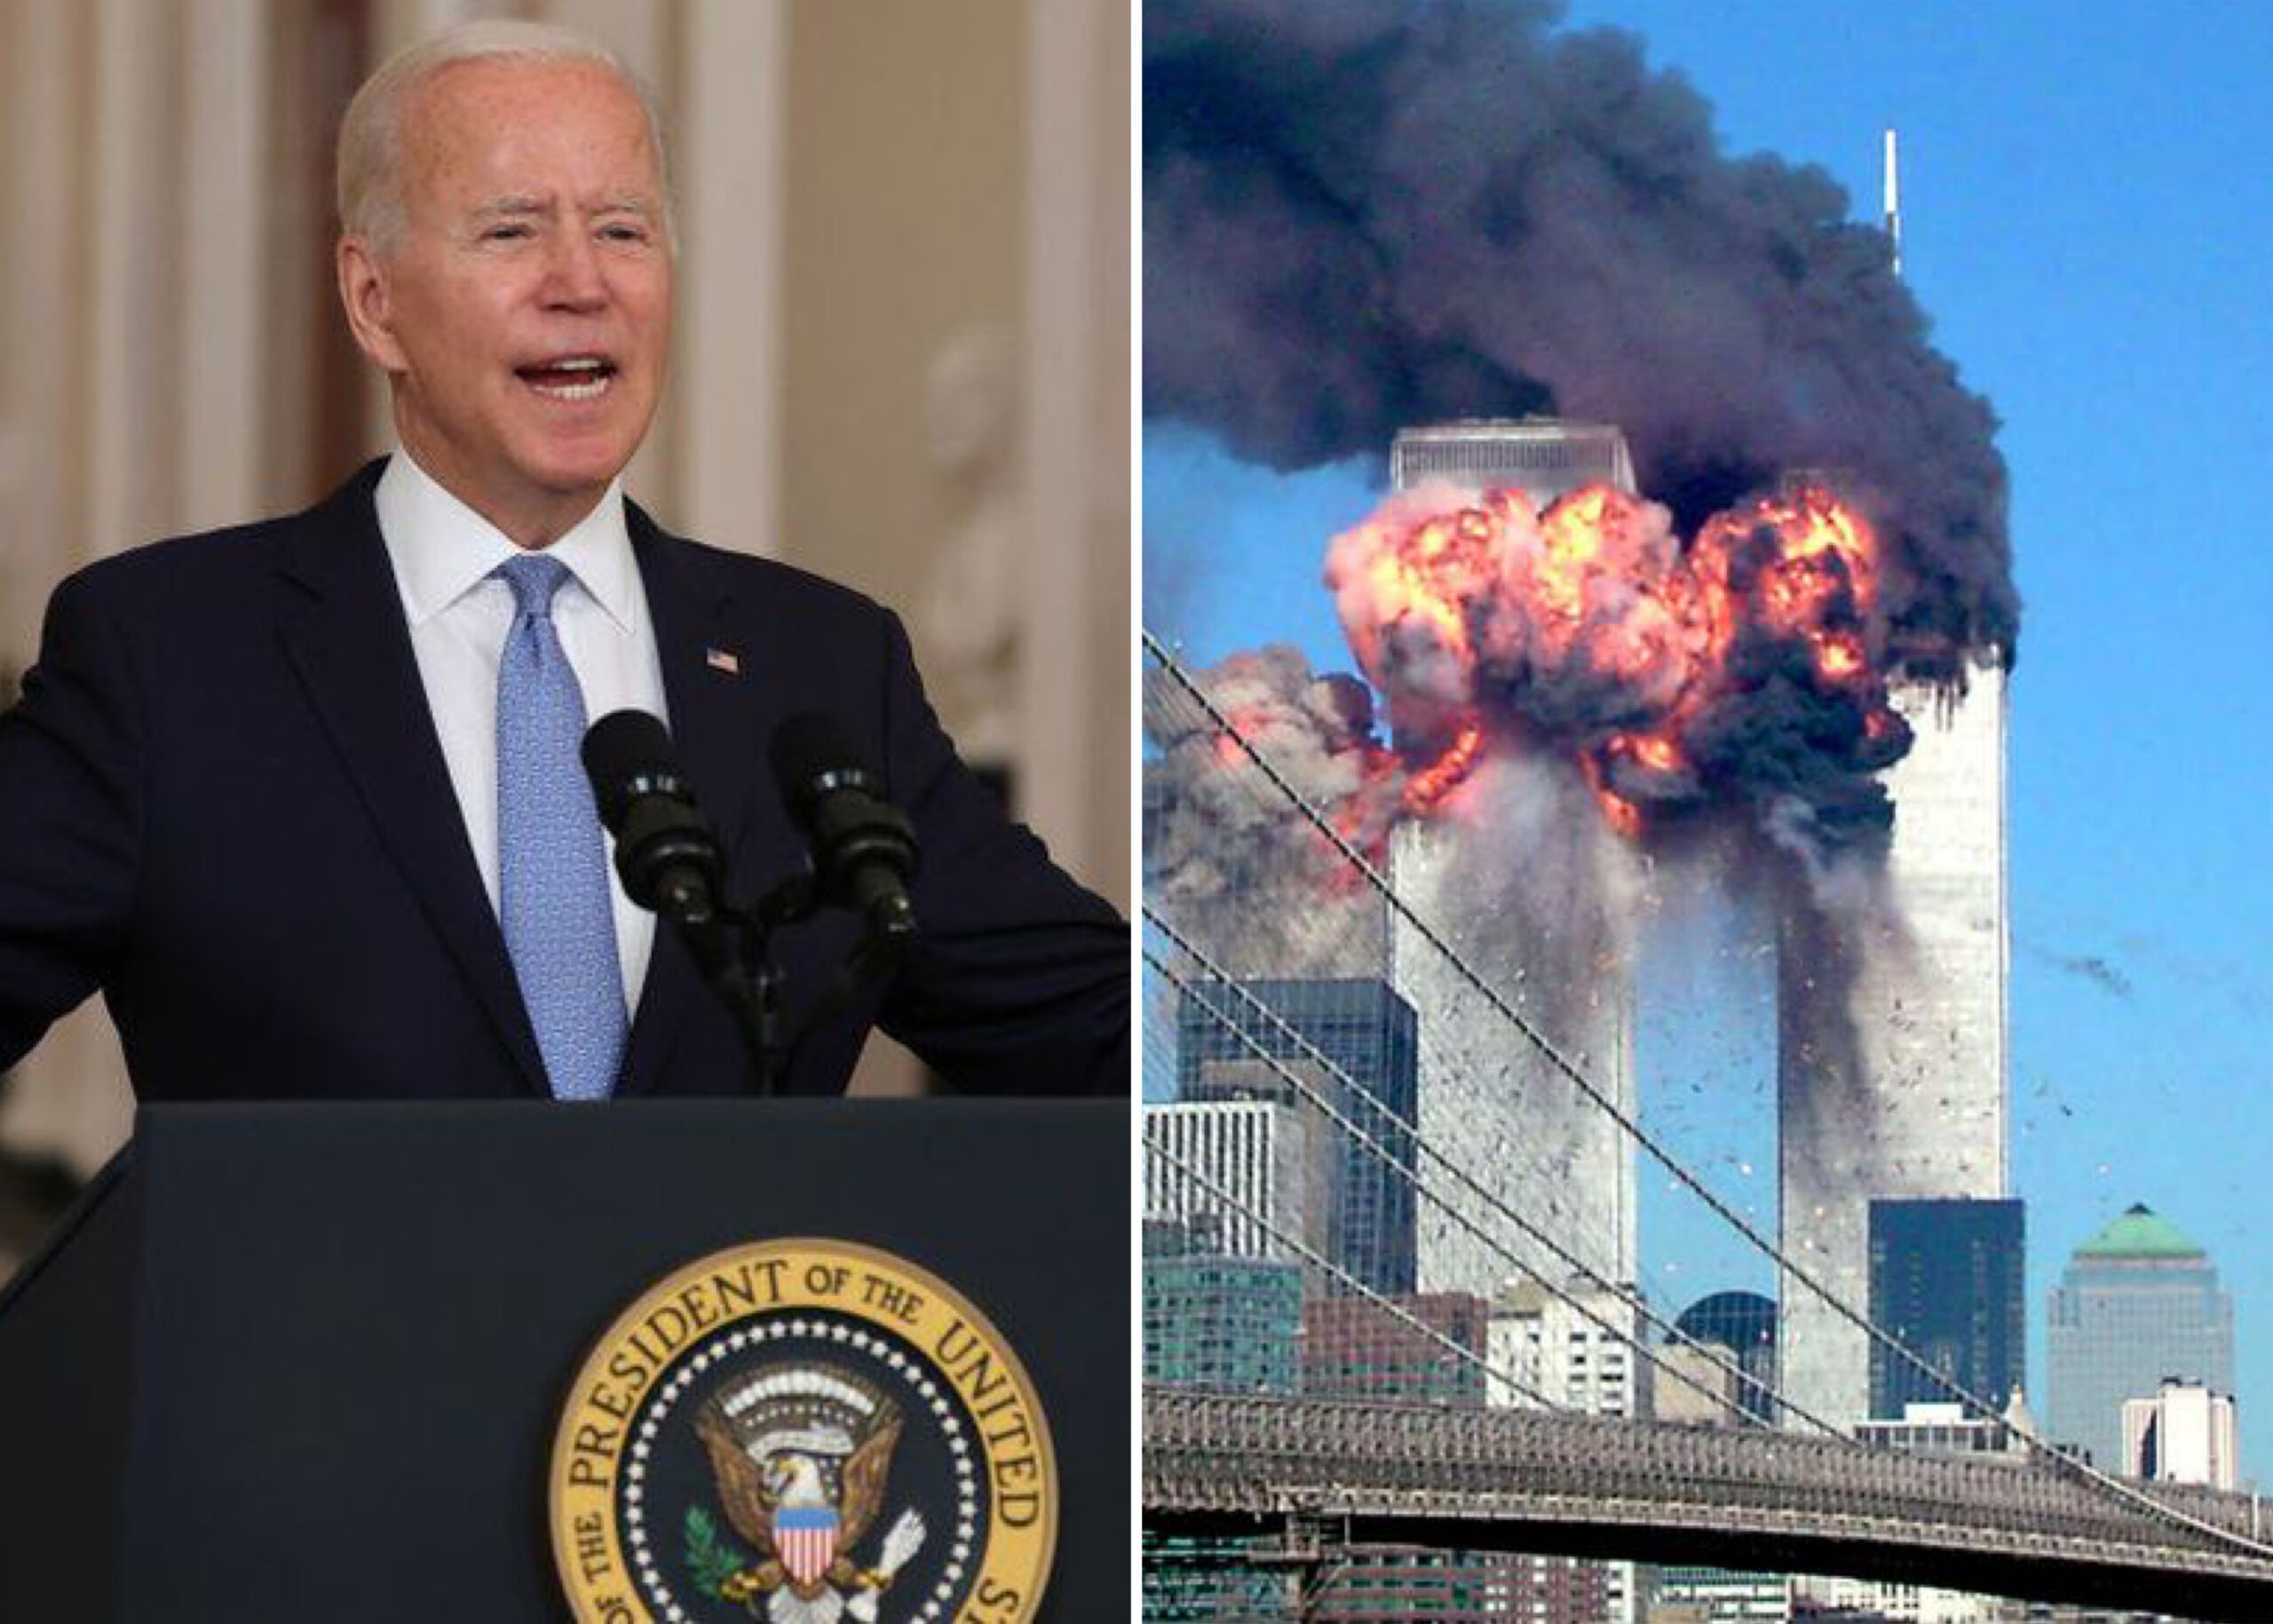 Joe Biden Calls For Unity As US Honours 9/11 Victims On 20th Anniversary Of Attacks